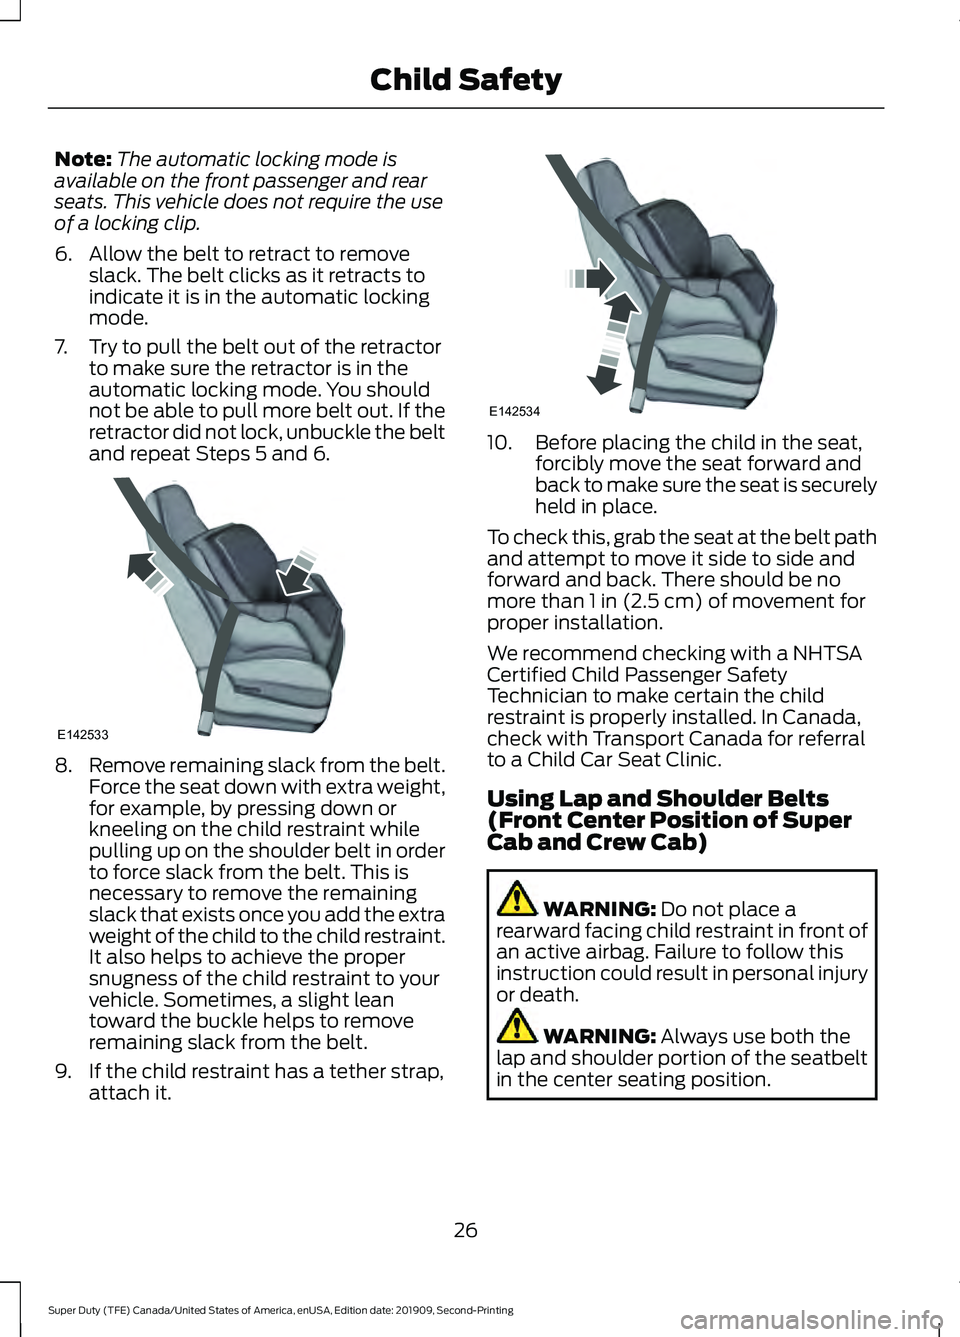 FORD F250 SUPER DUTY 2020  Owners Manual Note:
The automatic locking mode is
available on the front passenger and rear
seats. This vehicle does not require the use
of a locking clip.
6. Allow the belt to retract to remove slack. The belt cli